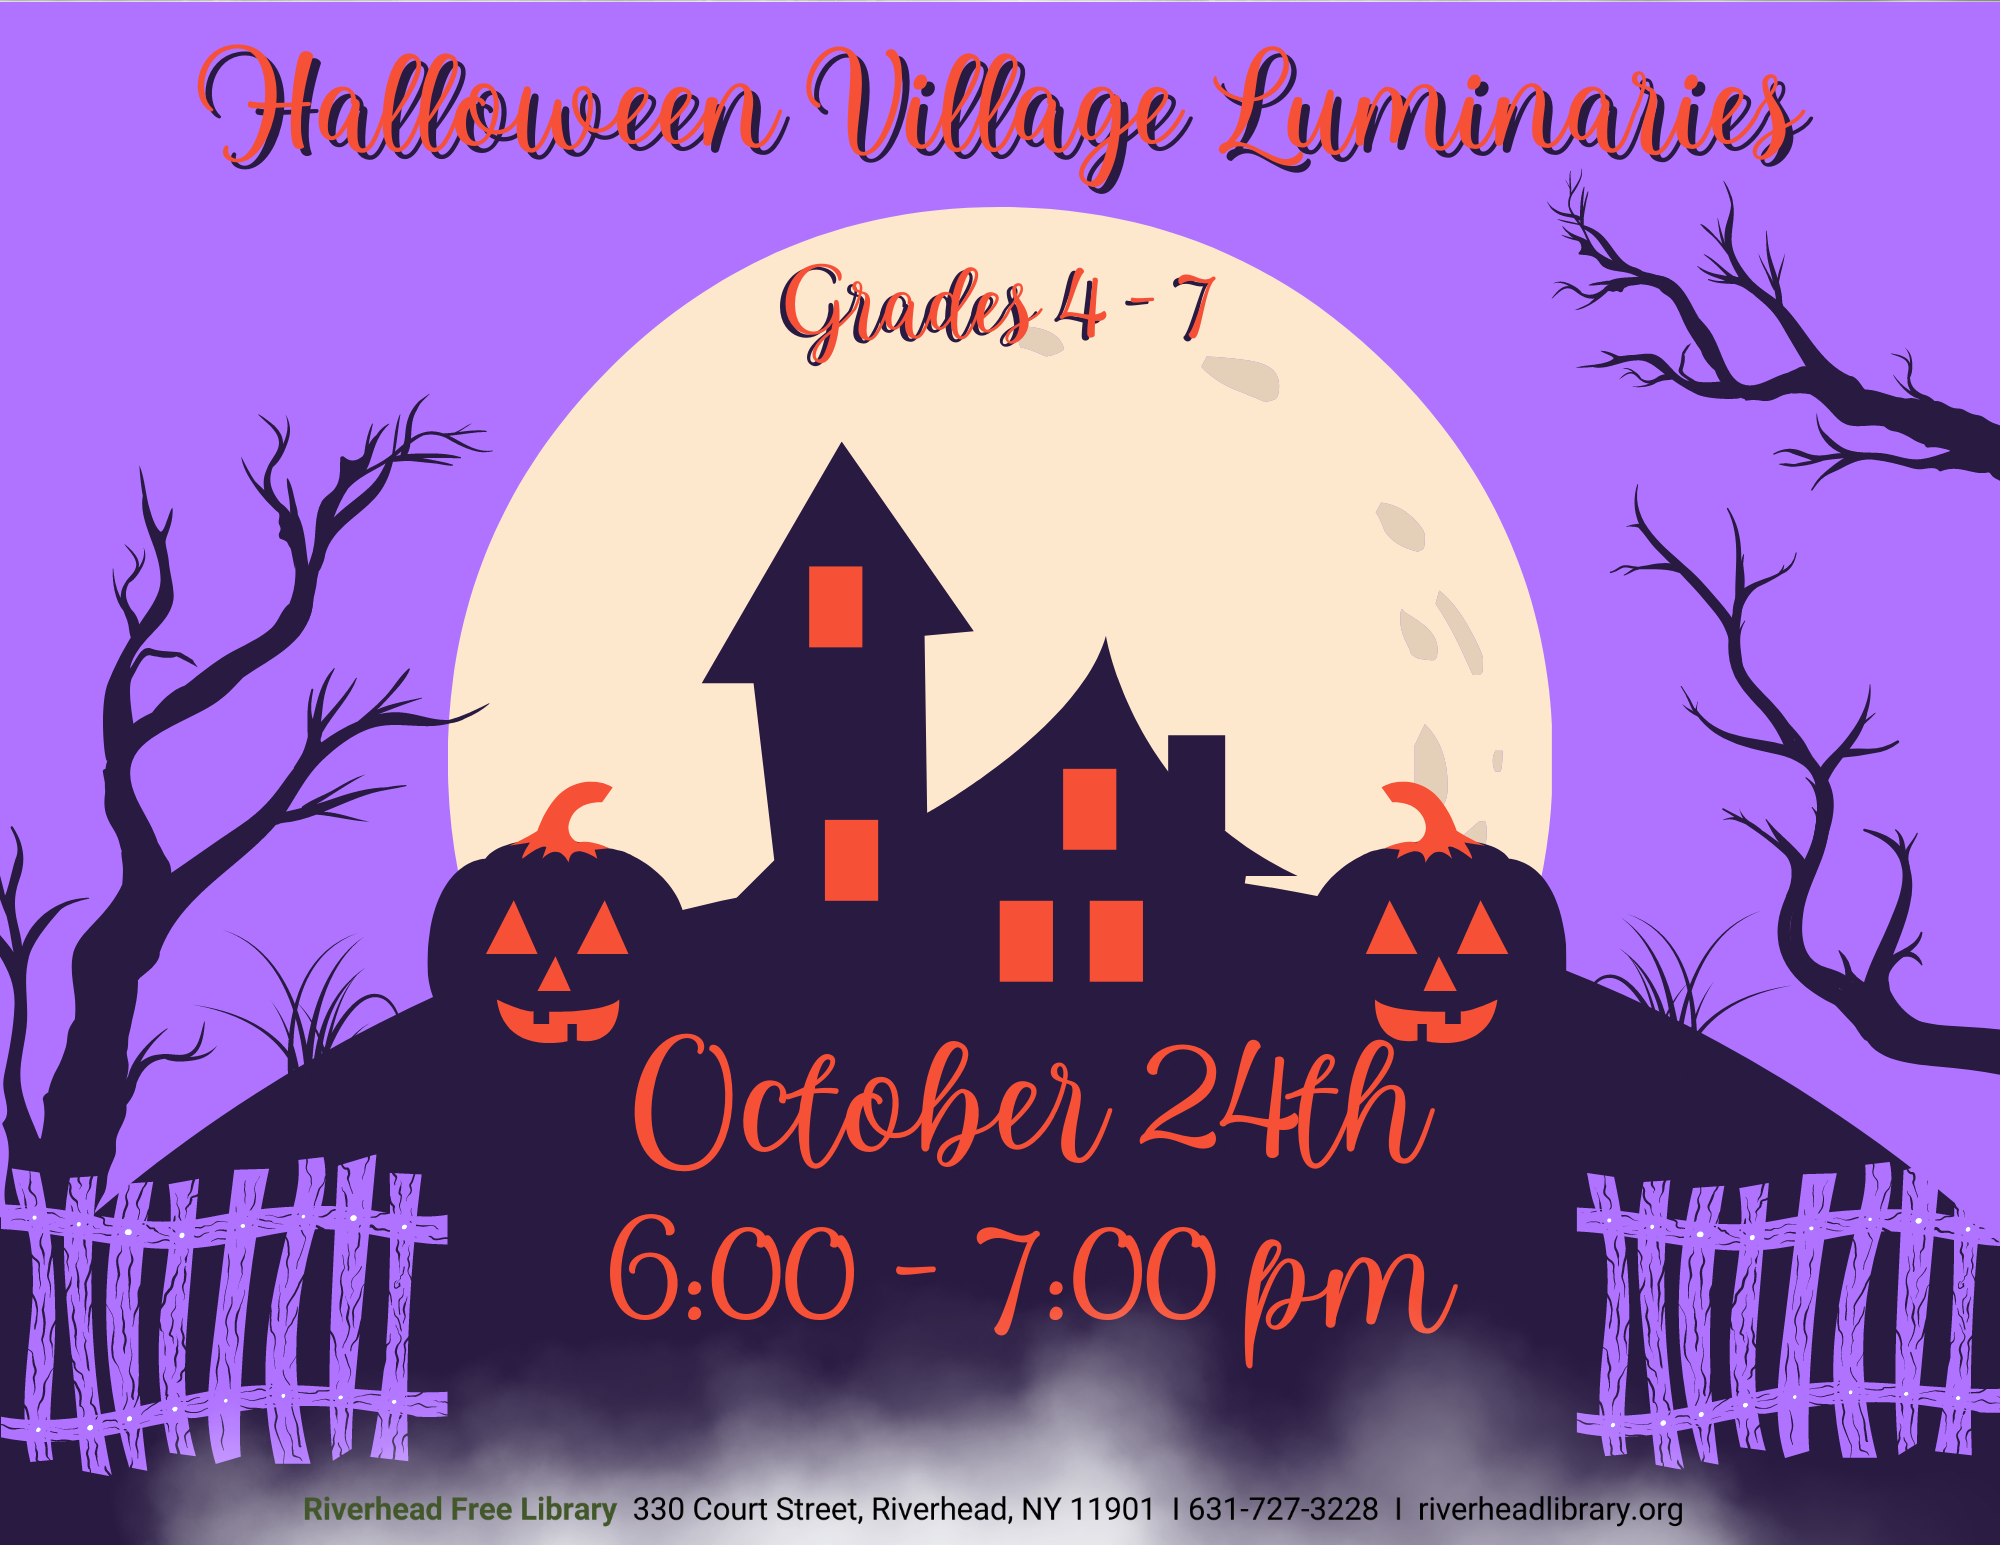 Program flyer featuring a graphic of a spooky mansion, followed by the following text, "Halloween Village Luminaries. Grades 4-7. October 24th, 6:00-7:00pm."